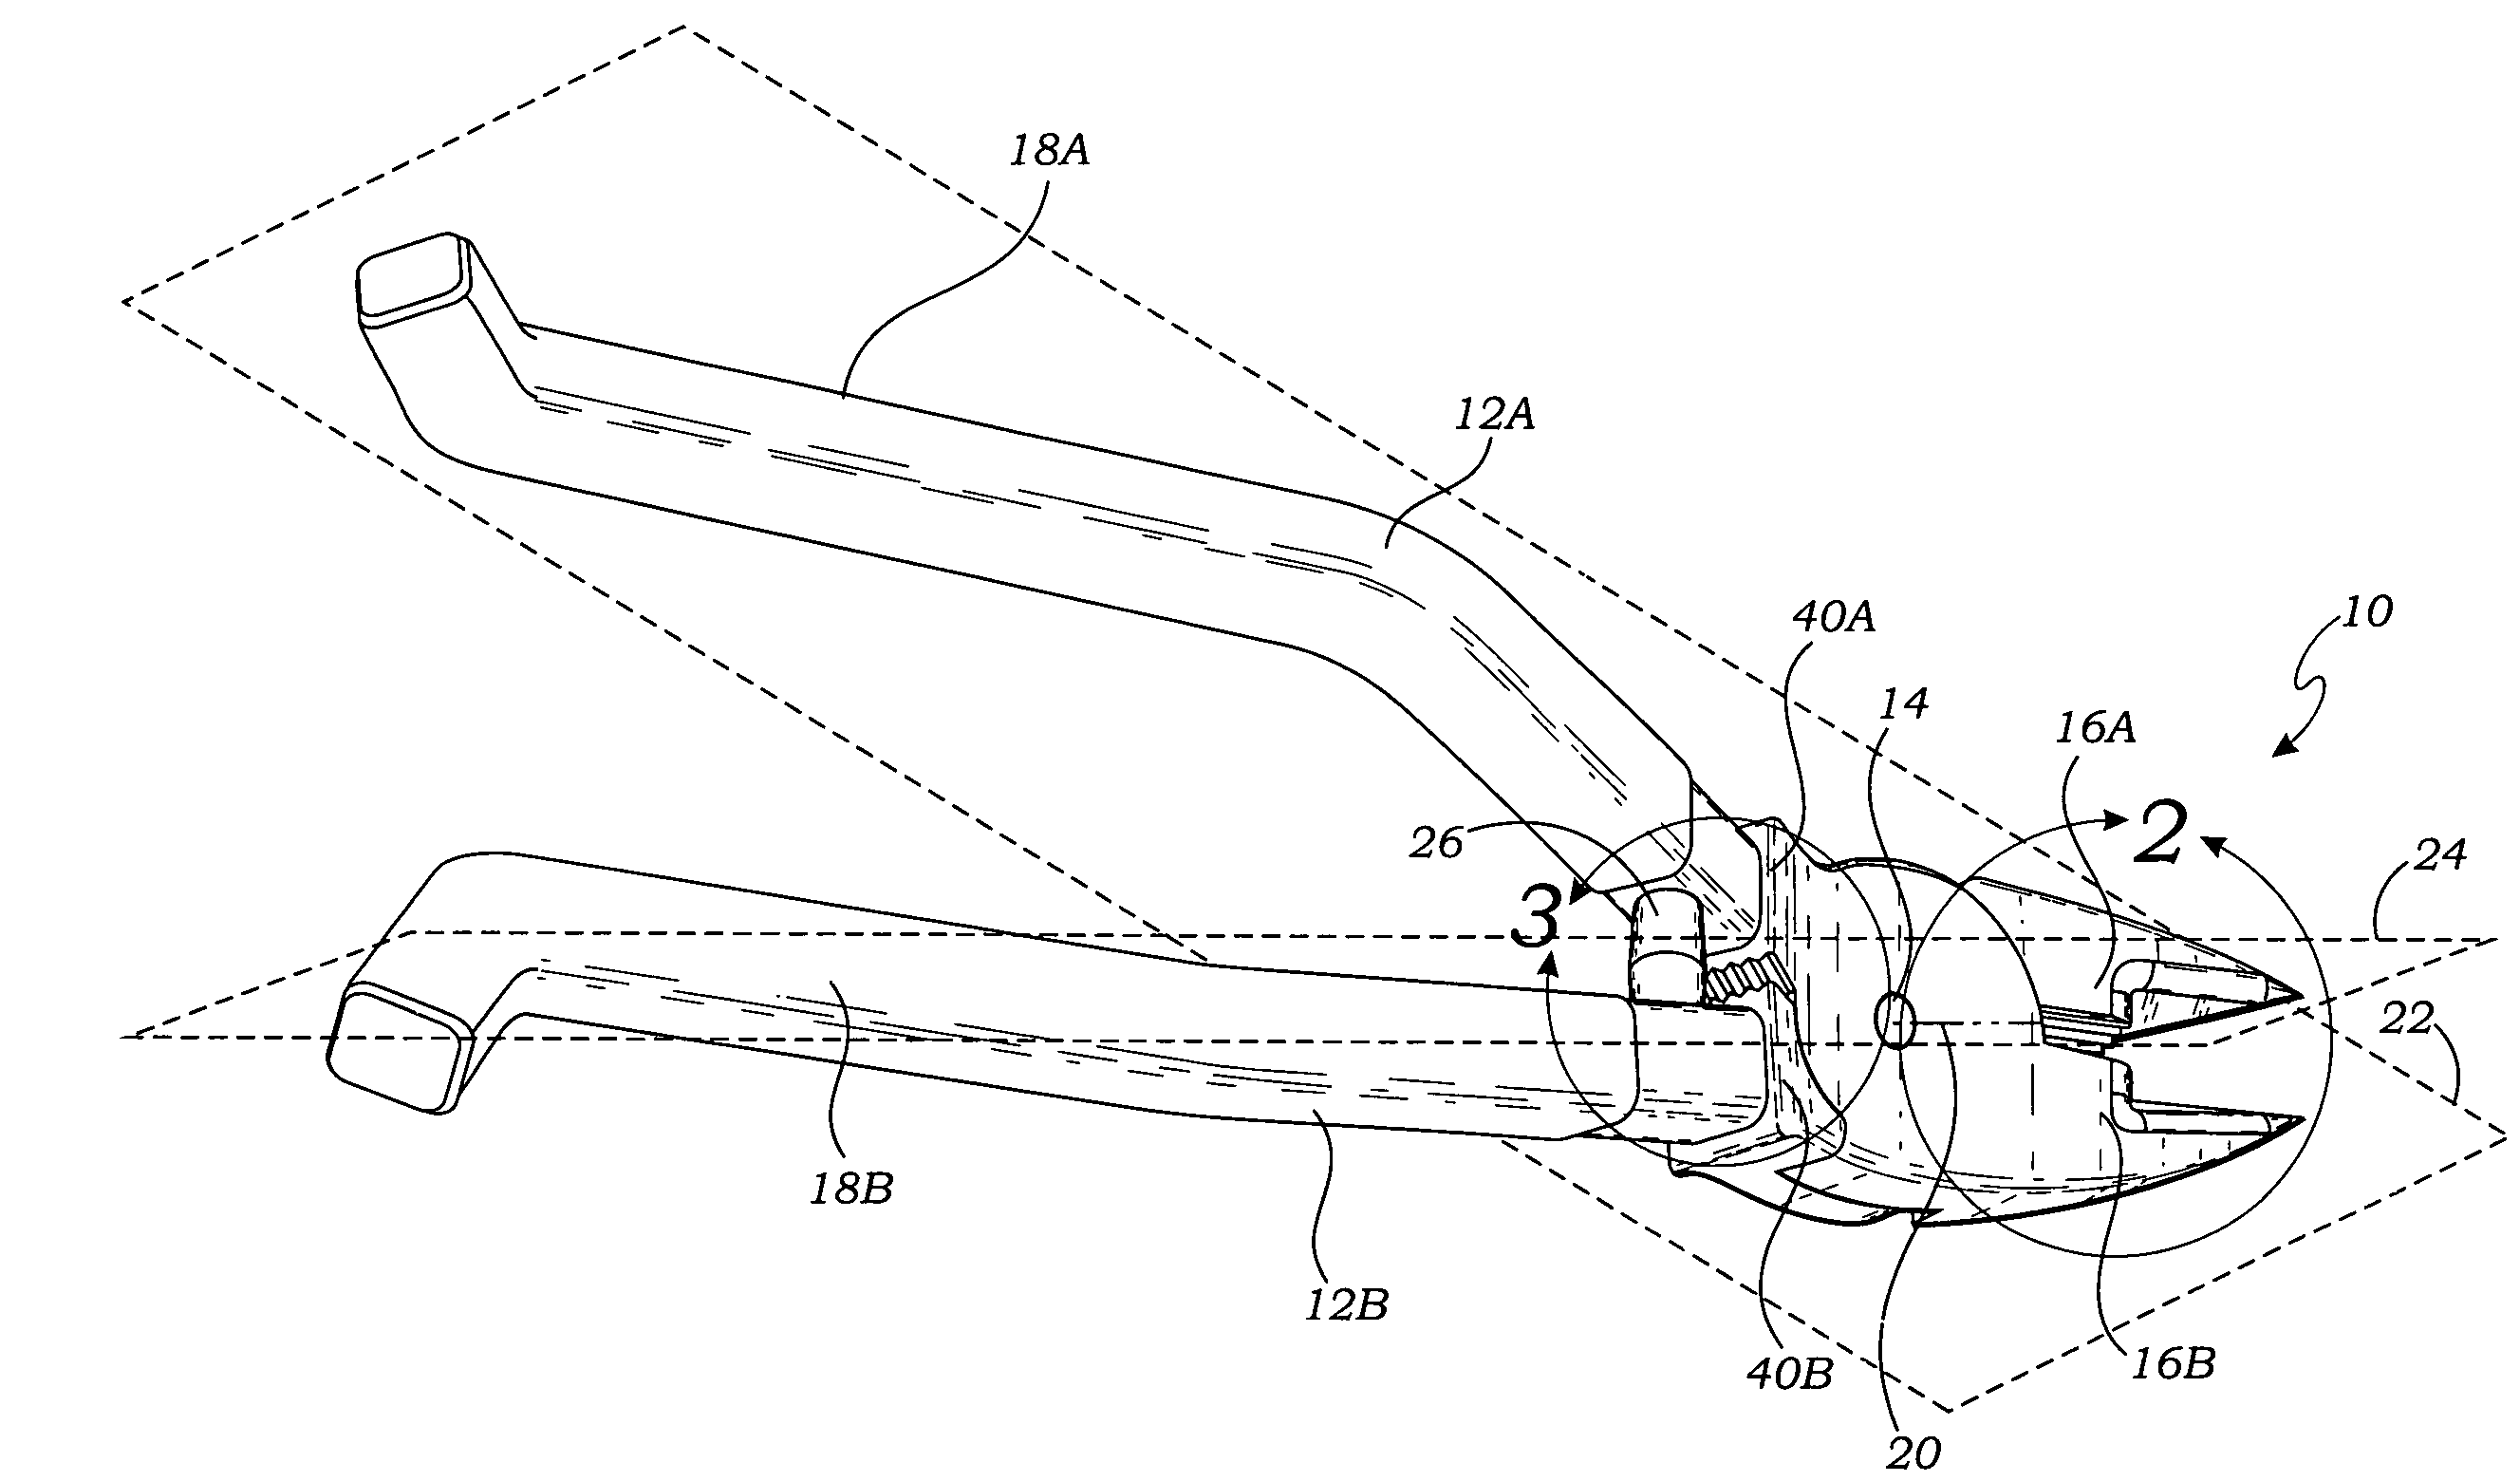 Hand tool for extracting a fastener from a material